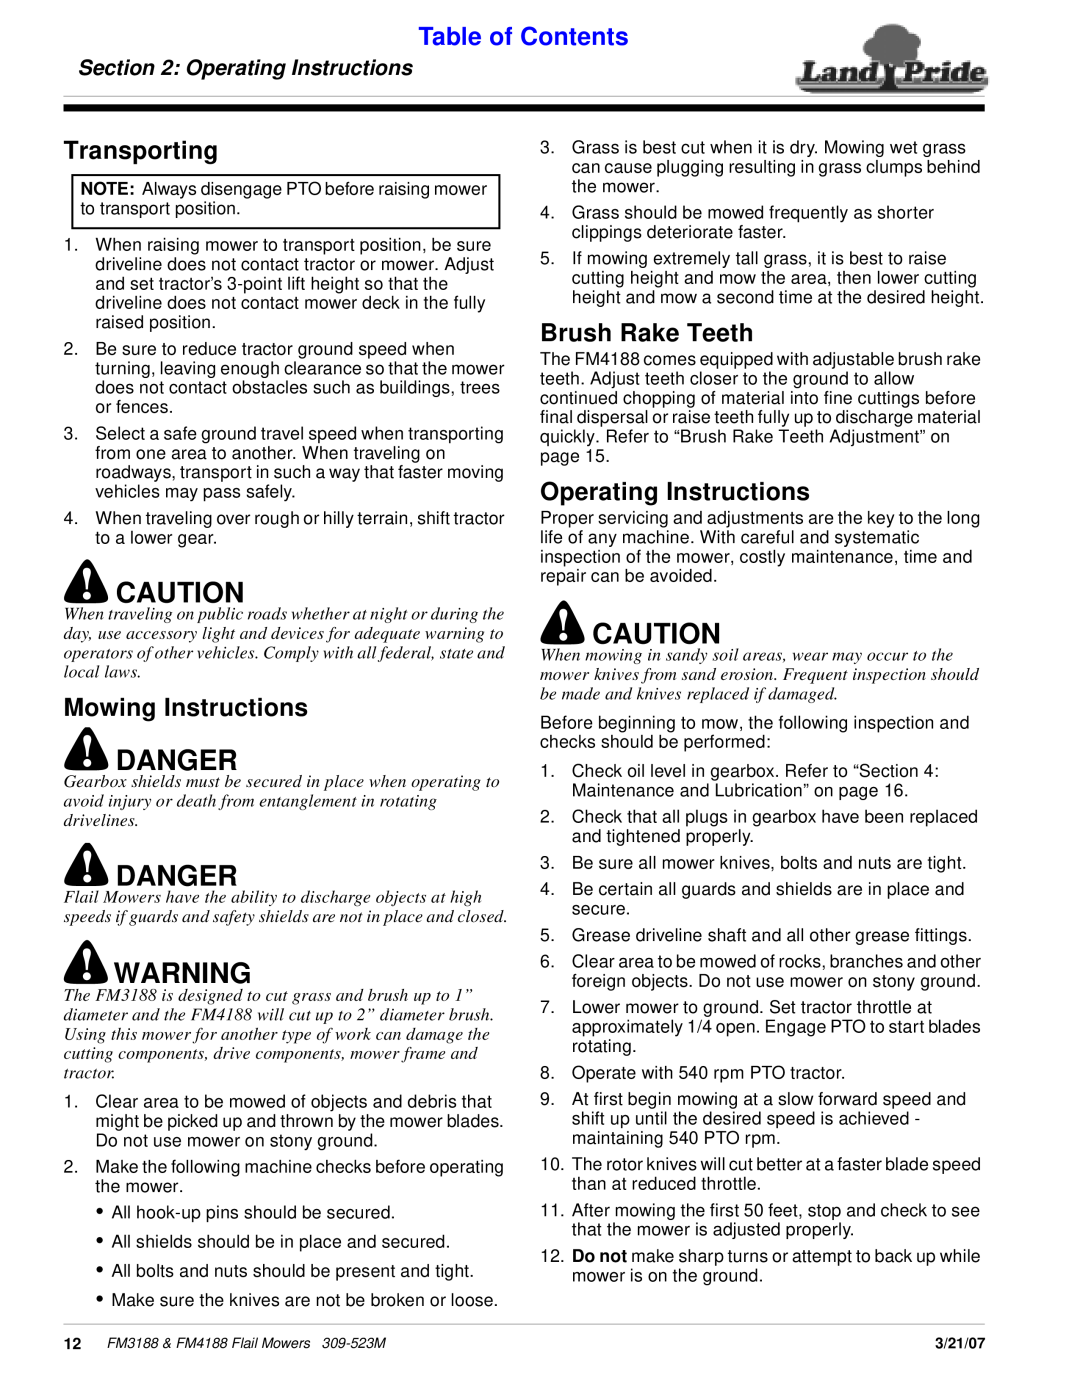 Land Pride FM4188 Transporting, Brush Rake Teeth, Operating Instructions, Mowing Instructions, Danger, Table of Contents 